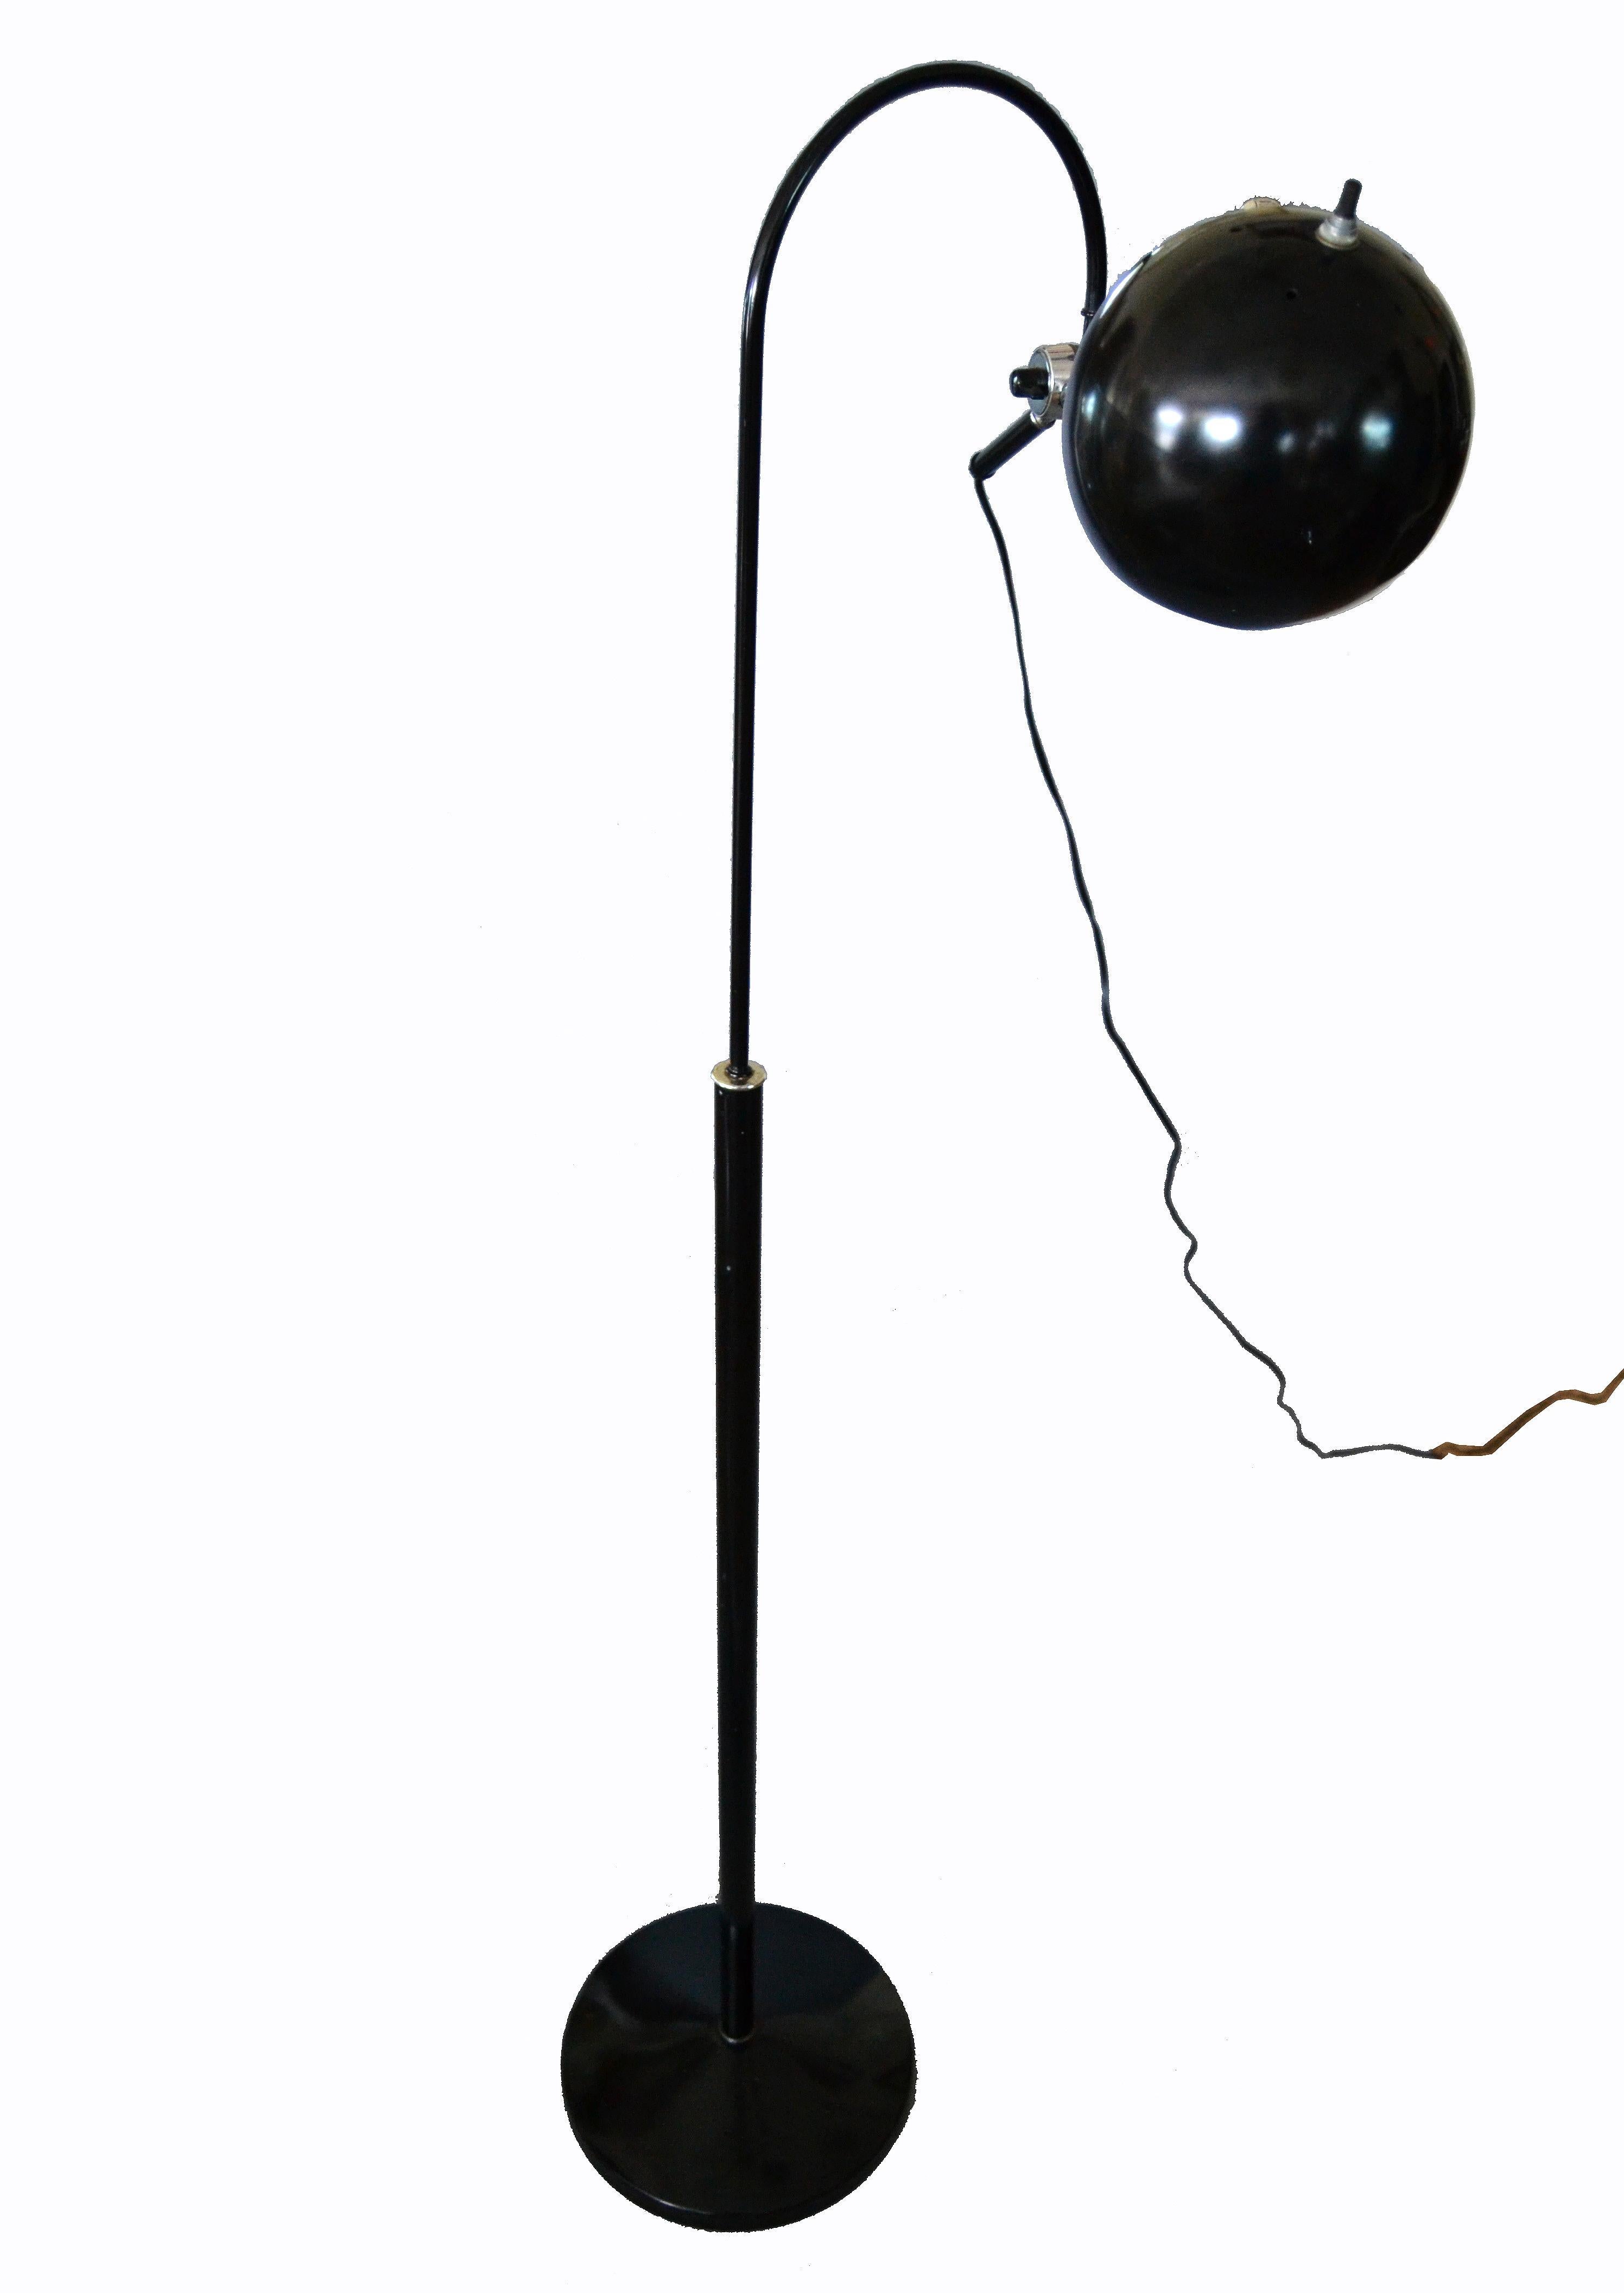 Mid-Century Modern swing arm black metal floor lamp with round ball shade.
Uses a max. 60 watts light bulb and has a switch at the round shade.
Can be positioned in different angles for the perfect reading light.
     